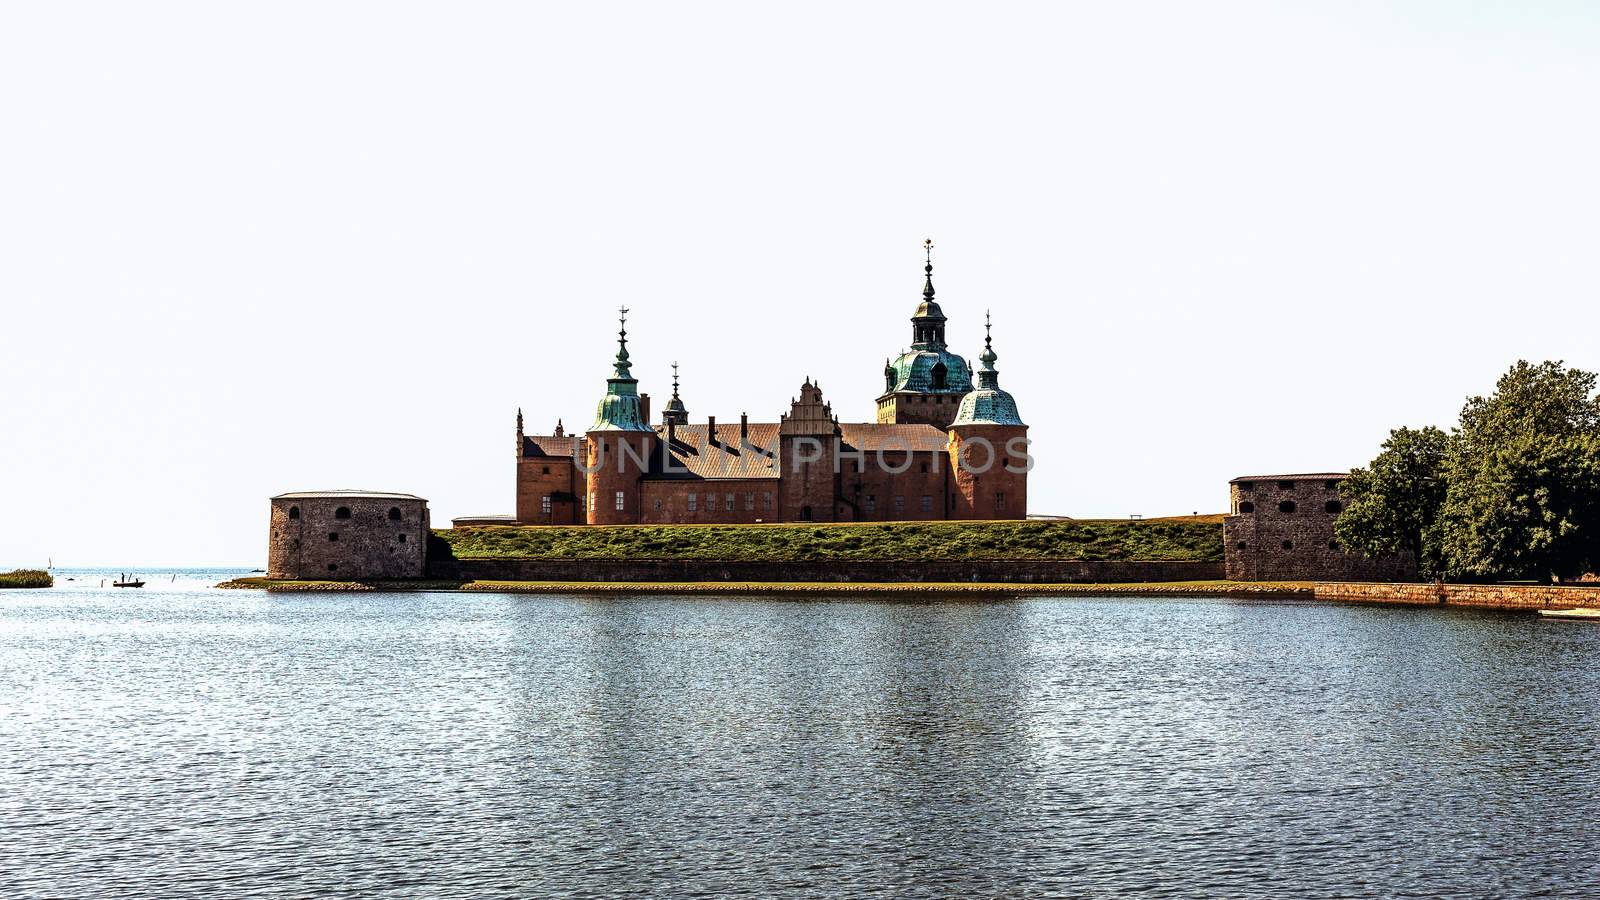 The legendary Kalmar castle dating back 800 years, reached its current design during the 16th century, when rebuilt by Vasa kings from the medieval castle into a Renaissance palace.